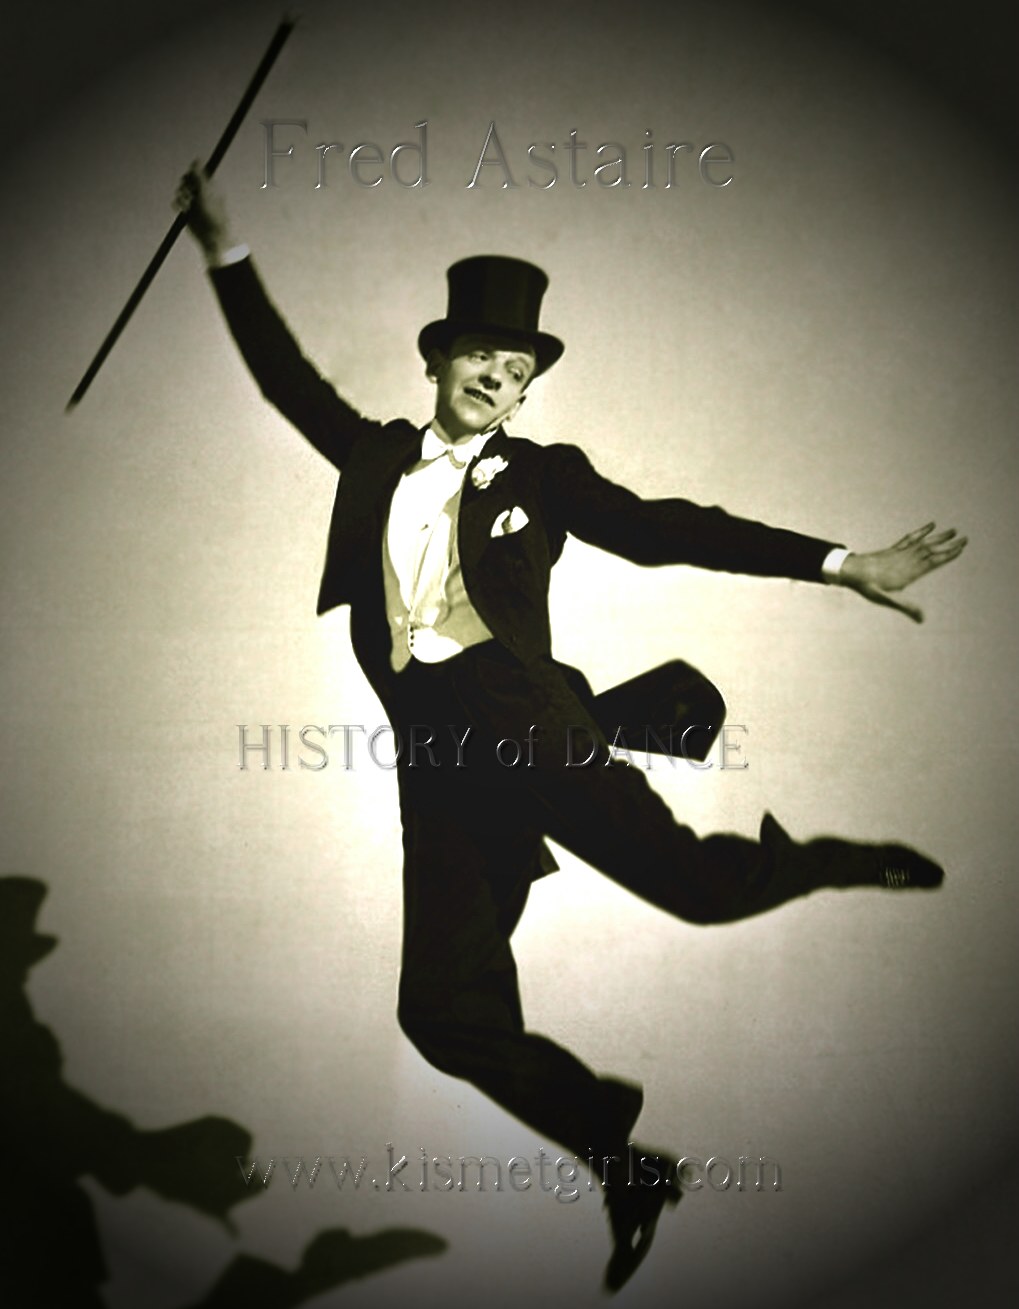 Fred Astaire percussive tap dance showman